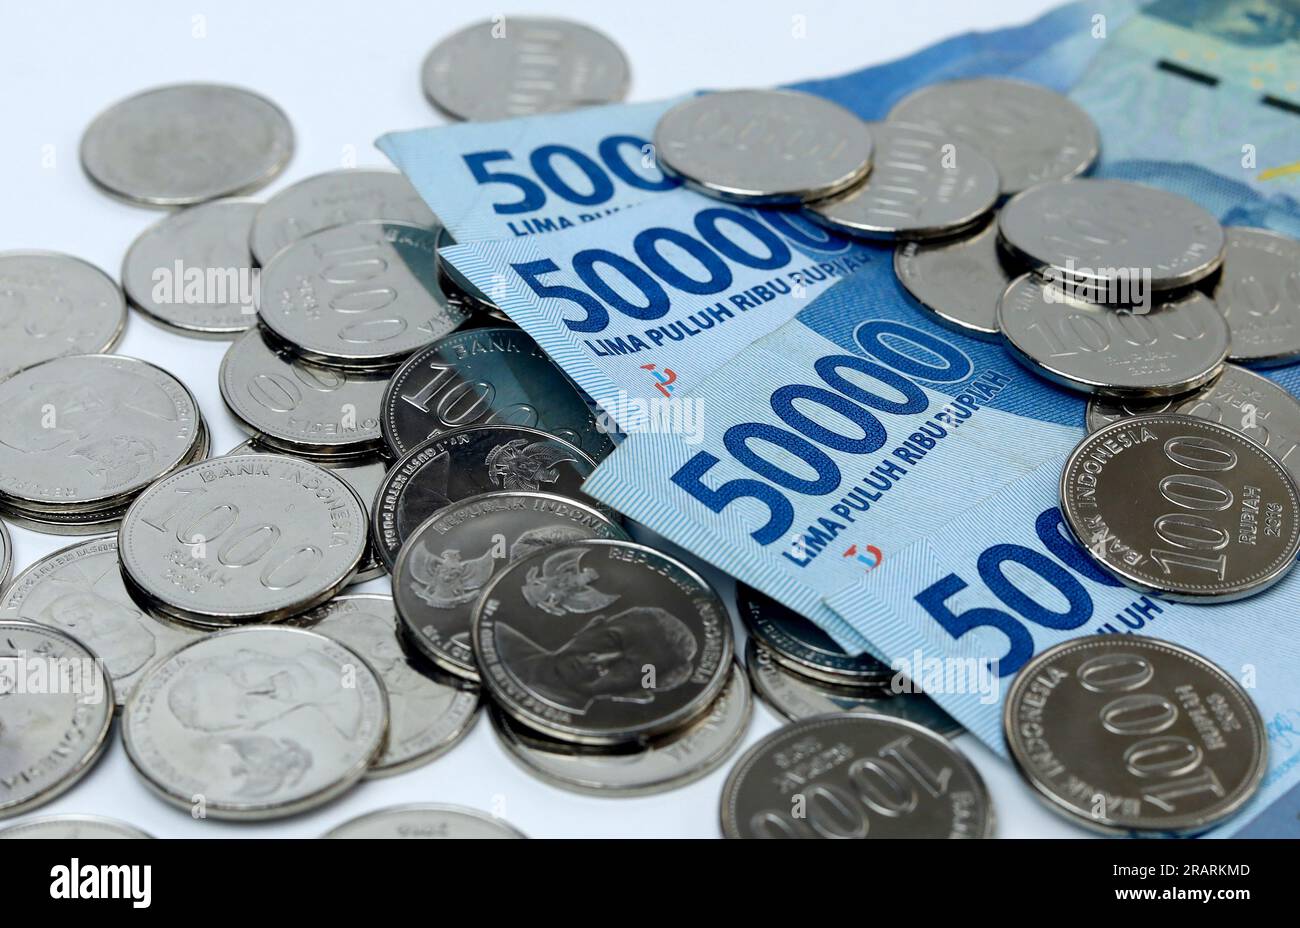 Coins and paper money with white background. Indonesian coin and paper currency Stock Photo